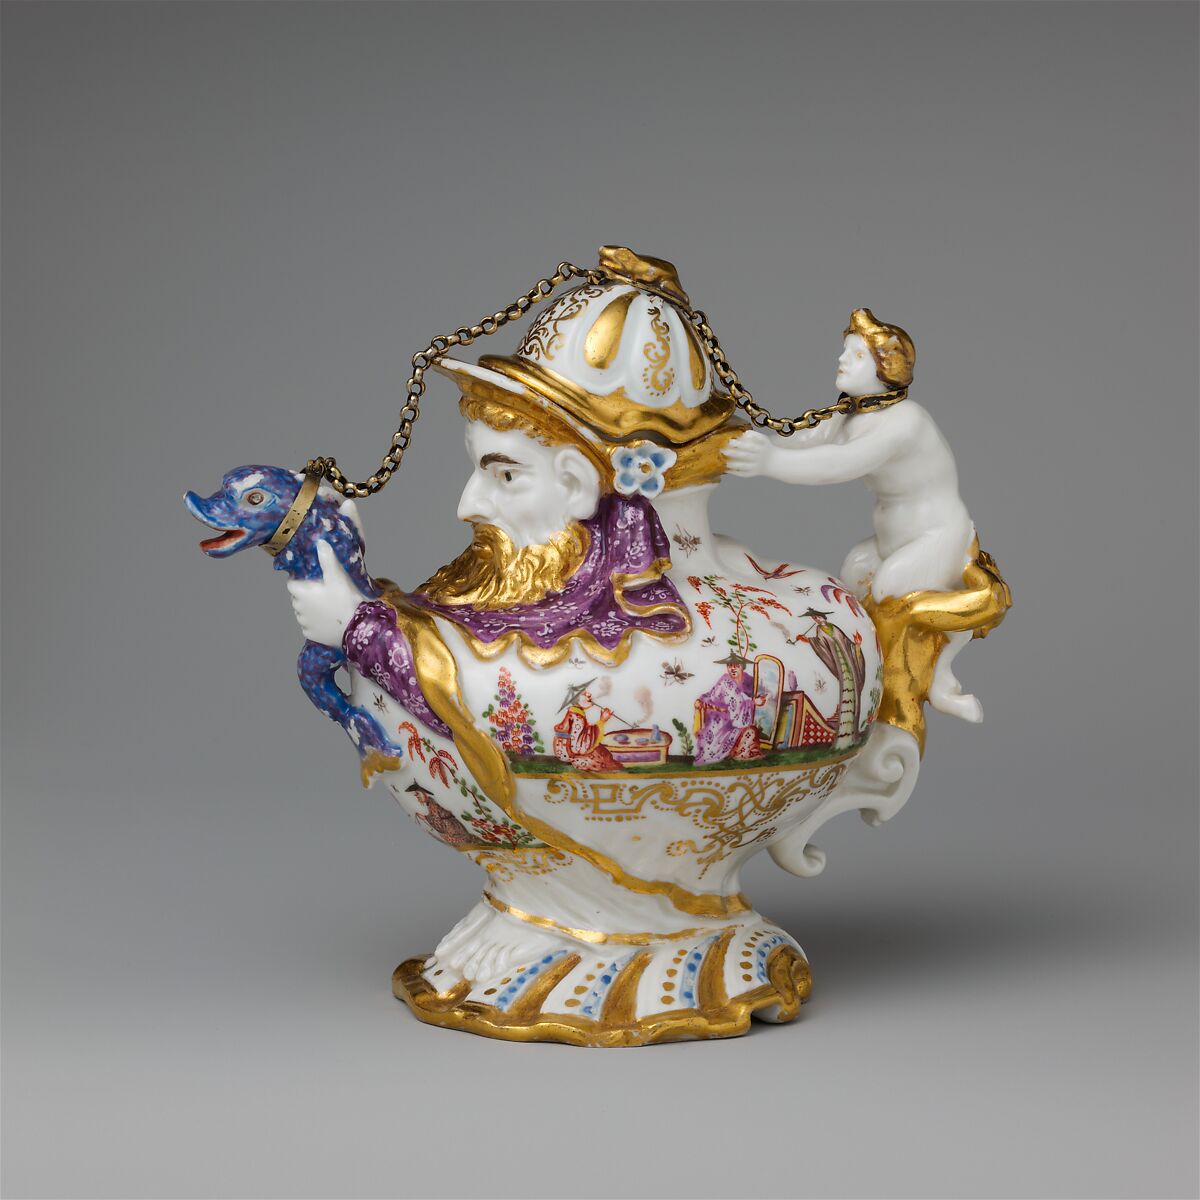 Teapot with cover, Meissen Manufactory (German, 1710–present), Hard-paste porcelain decorated in polychrome enamels, gold; metal chain and mounts, German, Meissen with Augsburg decoration 